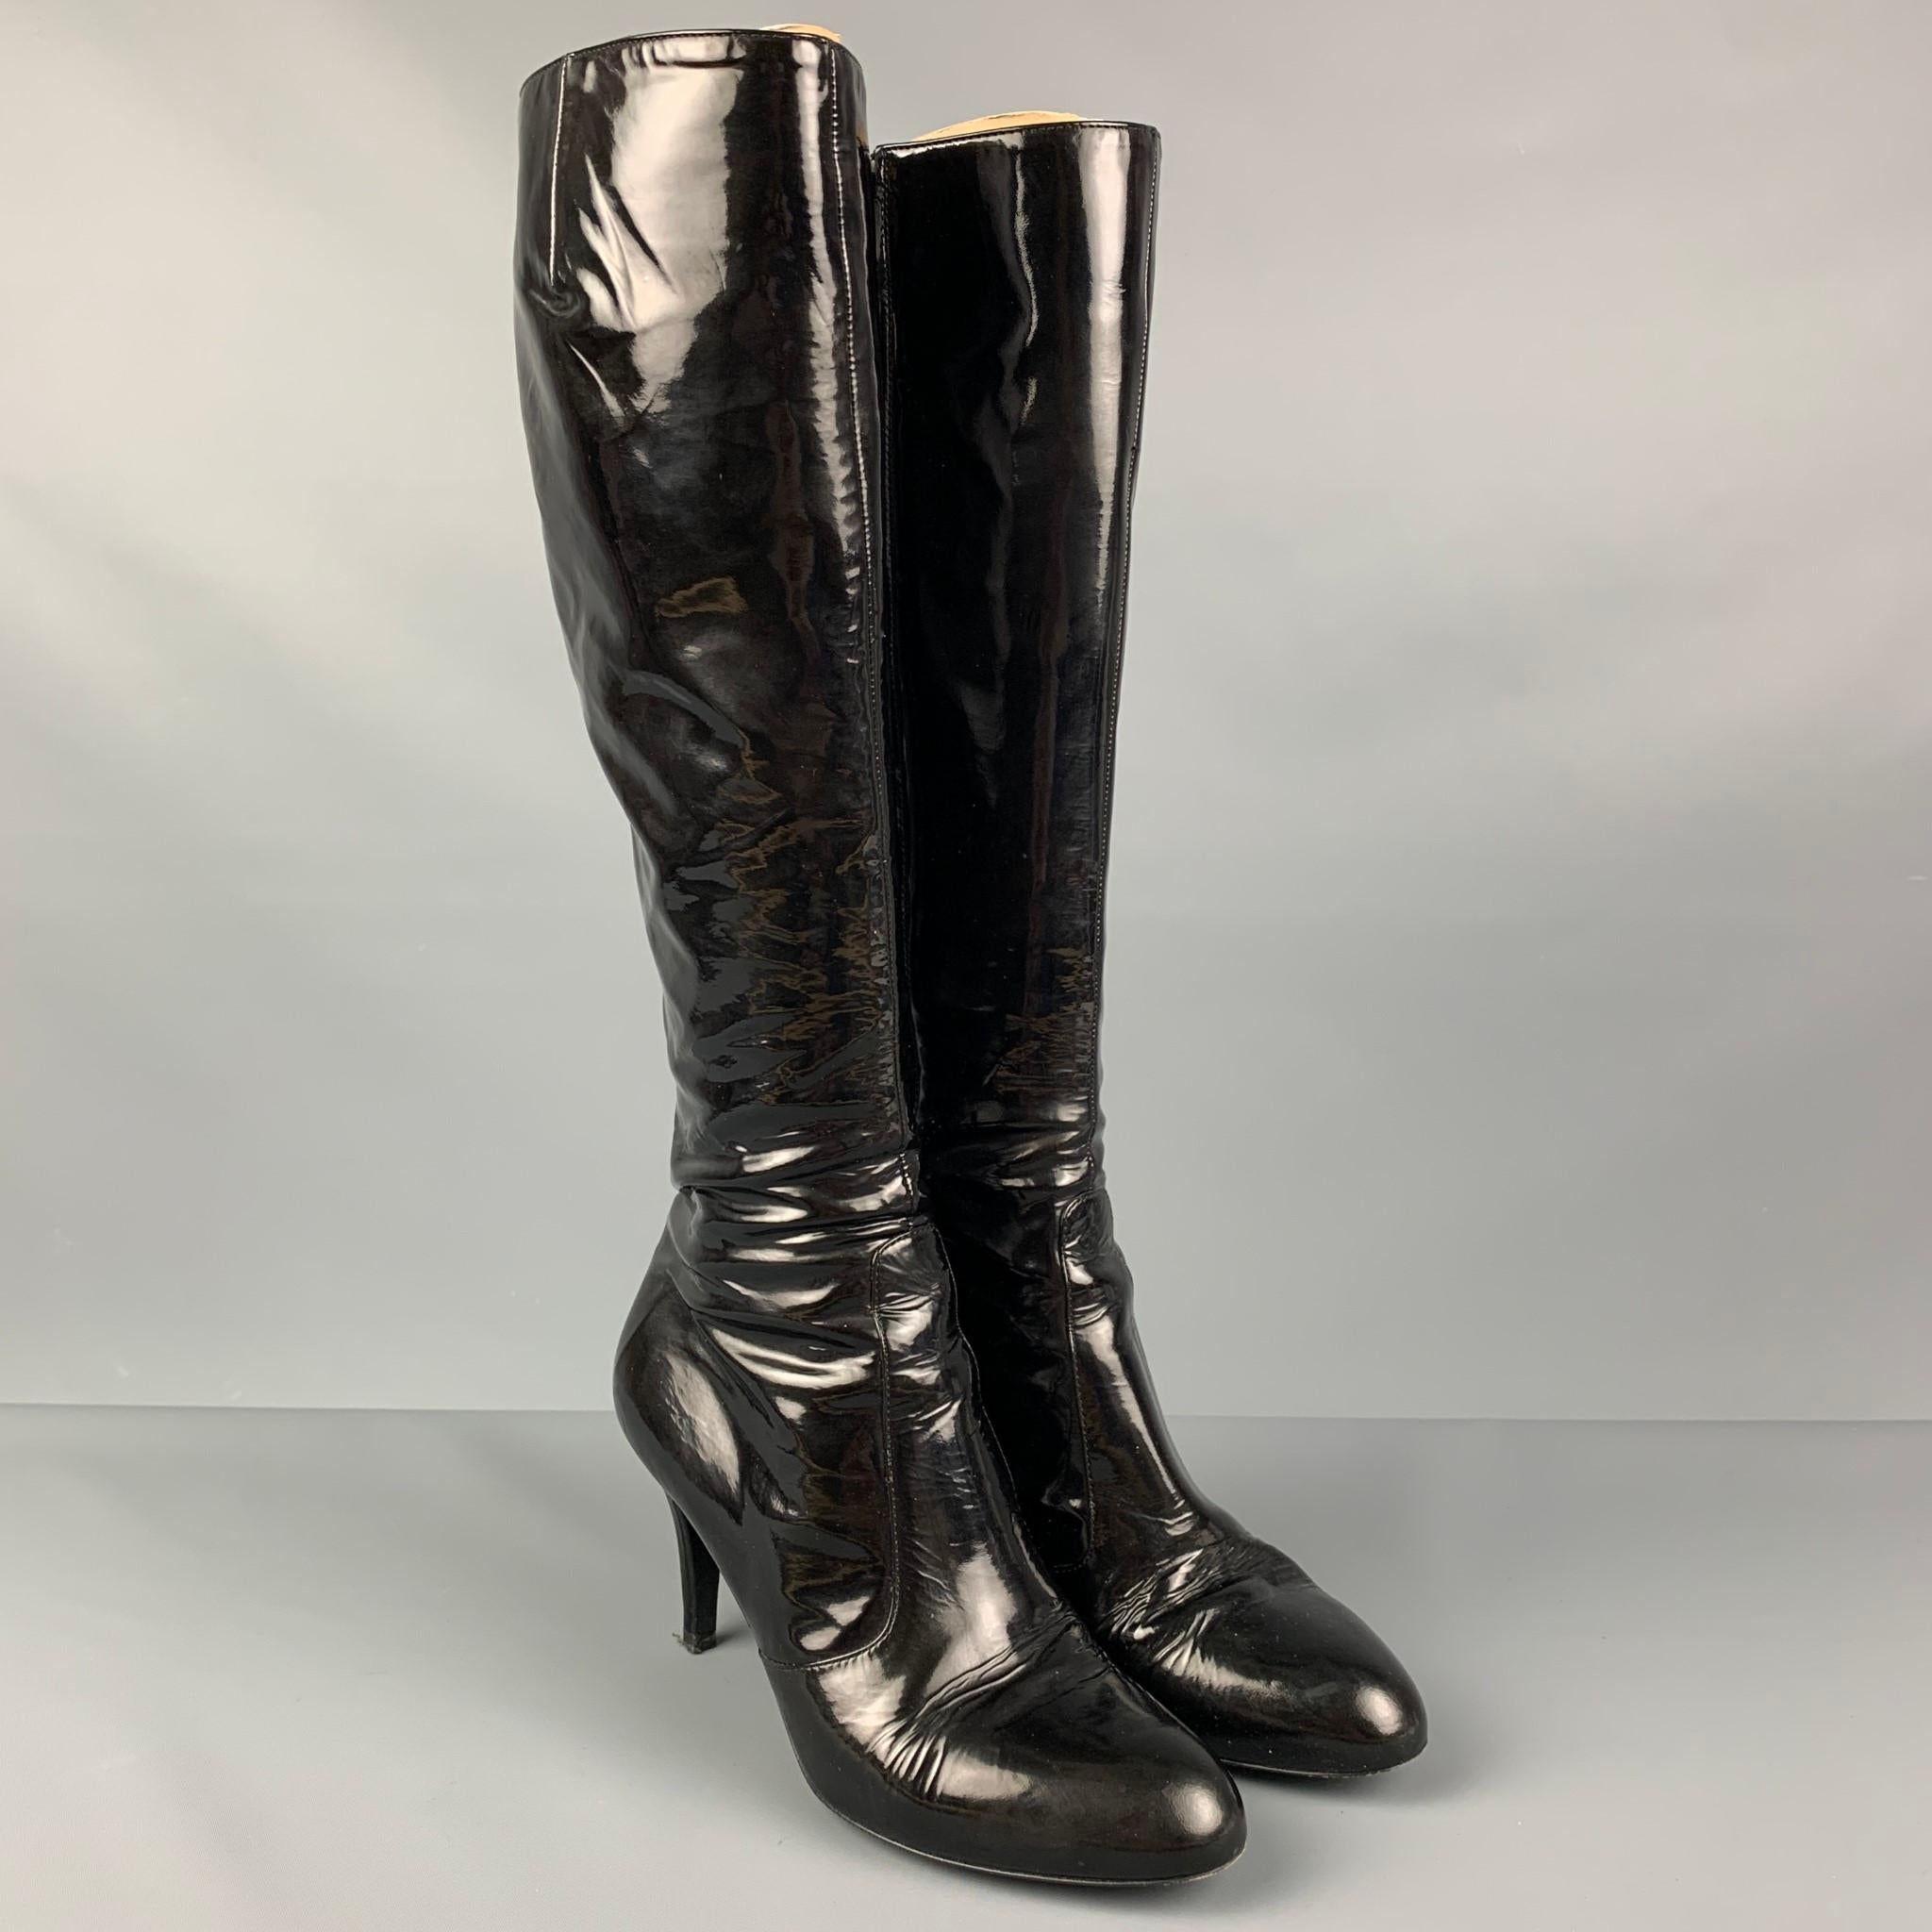 SERGIO ROSSI boots comes in a black patent leather with a purple lining featuring a stacked heel and a sie zipper closure. 

Good Pre-Owned Condition. Light wear.
Marked: 8262 8050 36.5

Measurements:

Length: 9 in.
Width: 3 in.
Height: 15 in. 